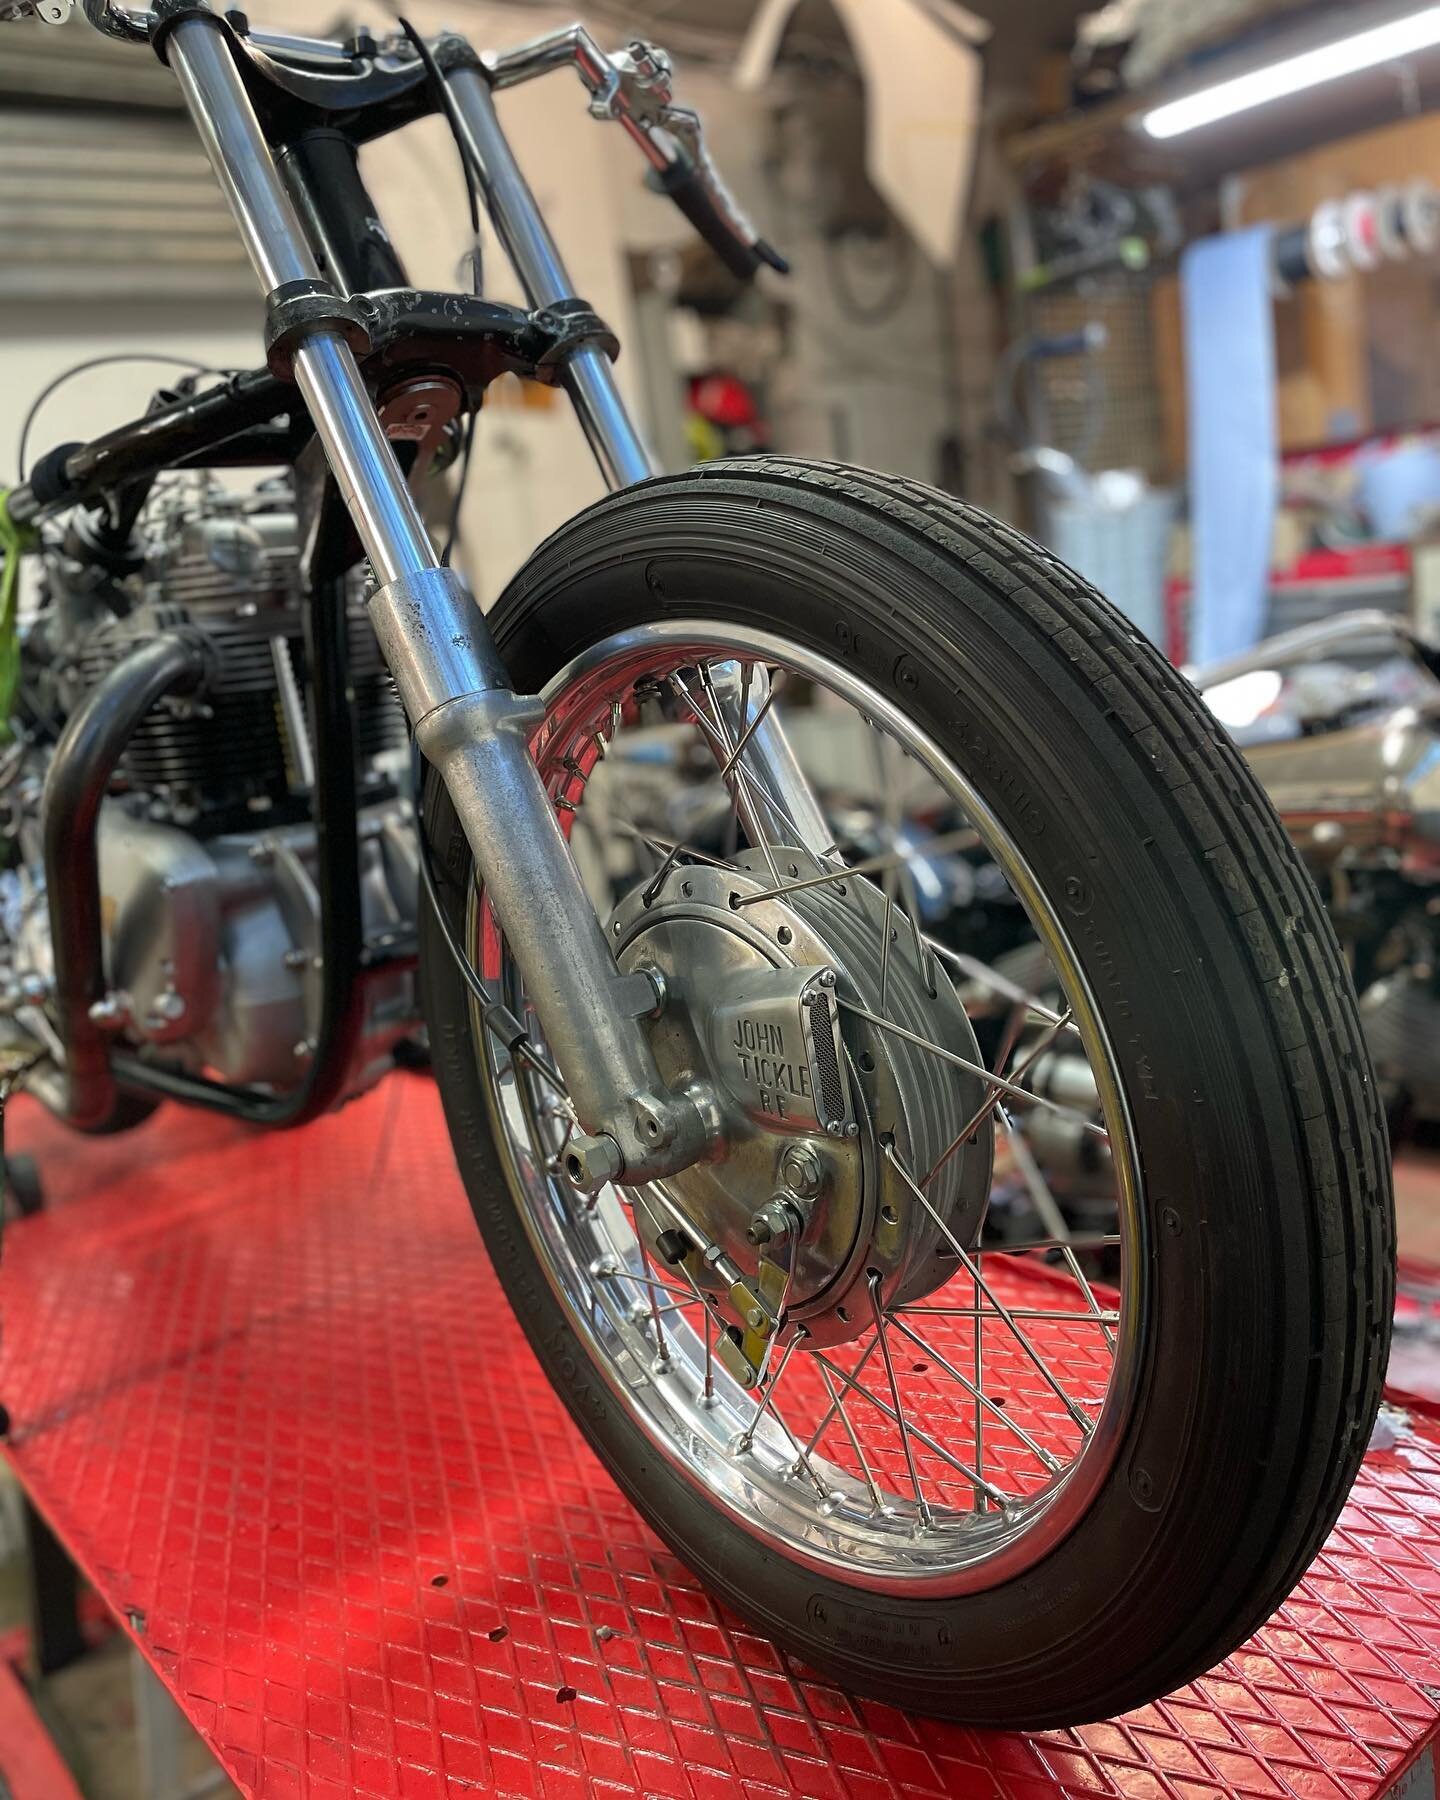 Petrol head jewellery by John Tickle fitted up to this Triton, it&rsquo;s in with us for a frame straighten on our Motoliner jig.. 

#jakerobbinsvintageengineering #motorcycles #triton #norton #triumph #custommotorcycle #engineering #hastings